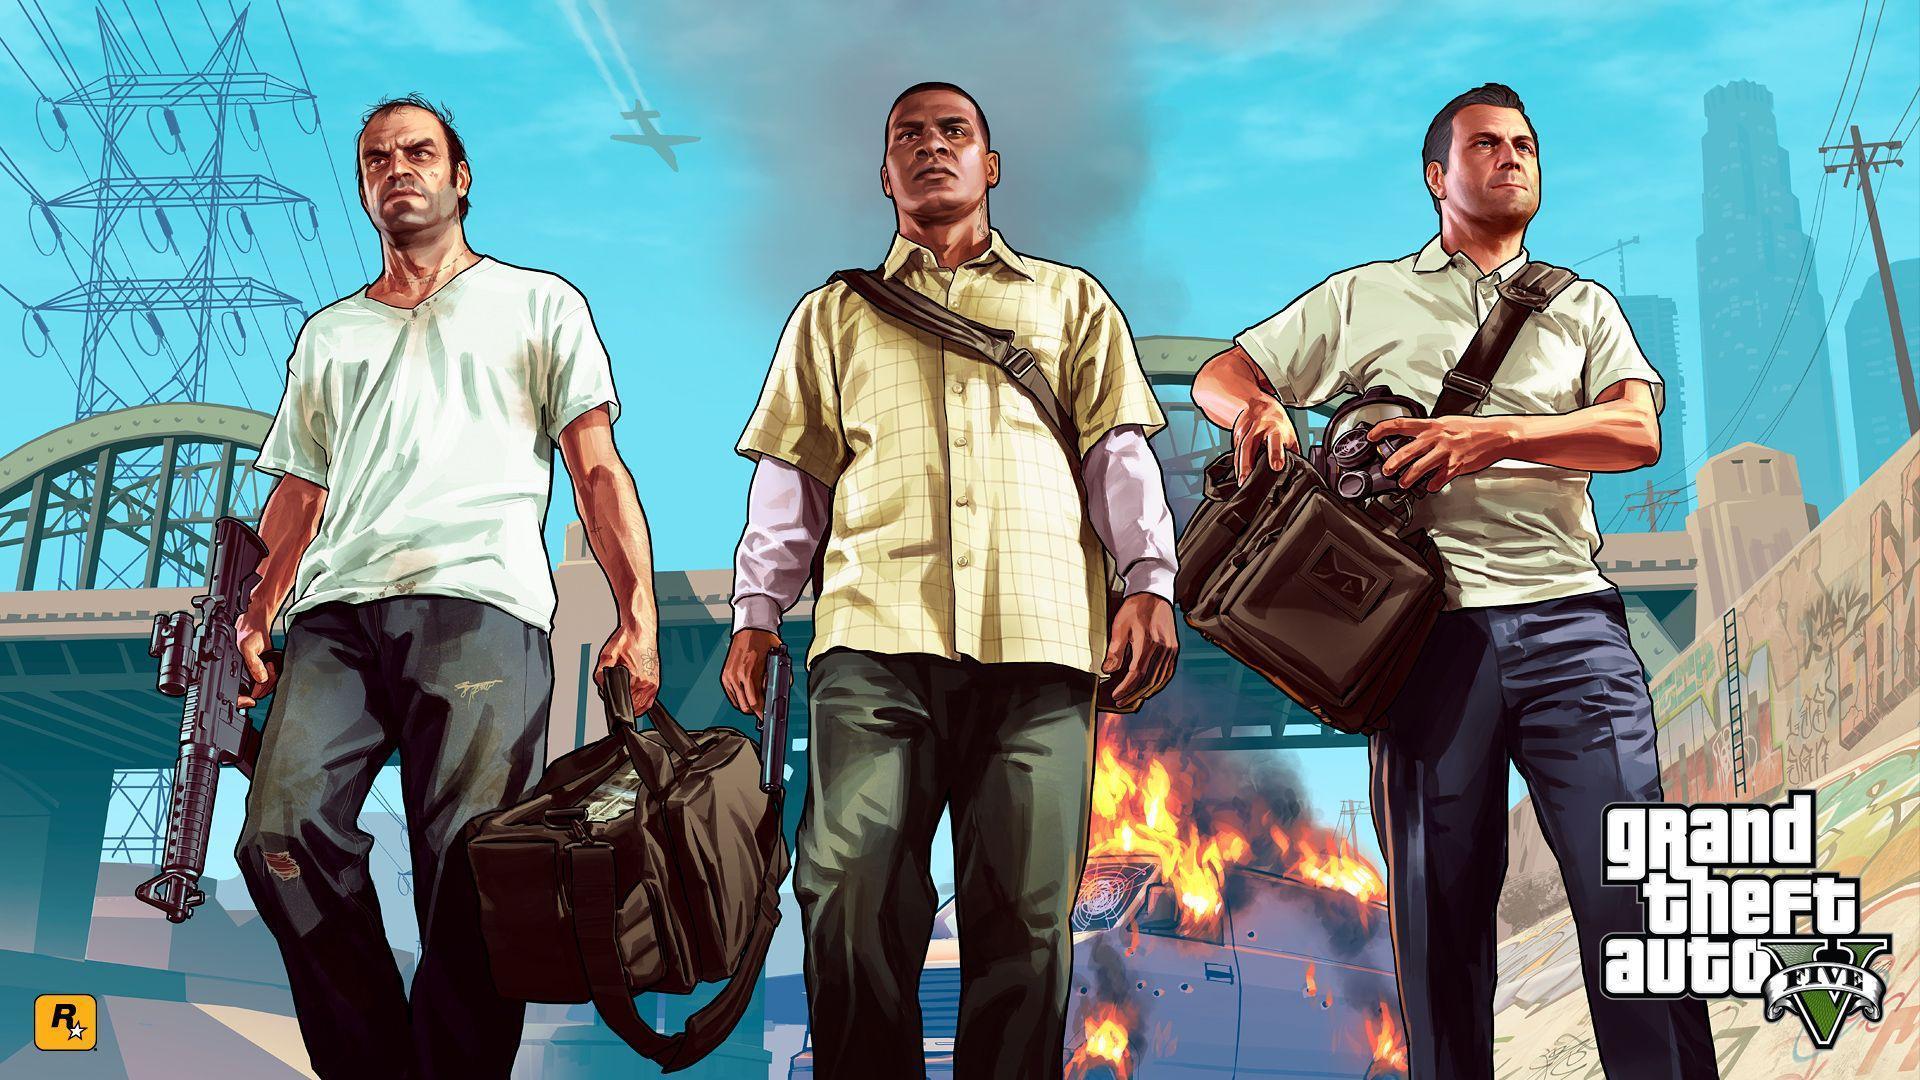 HD wallpaper Grand Theft Auto Online game wallpaper Grand Theft Auto V  Online  Wallpaper Flare